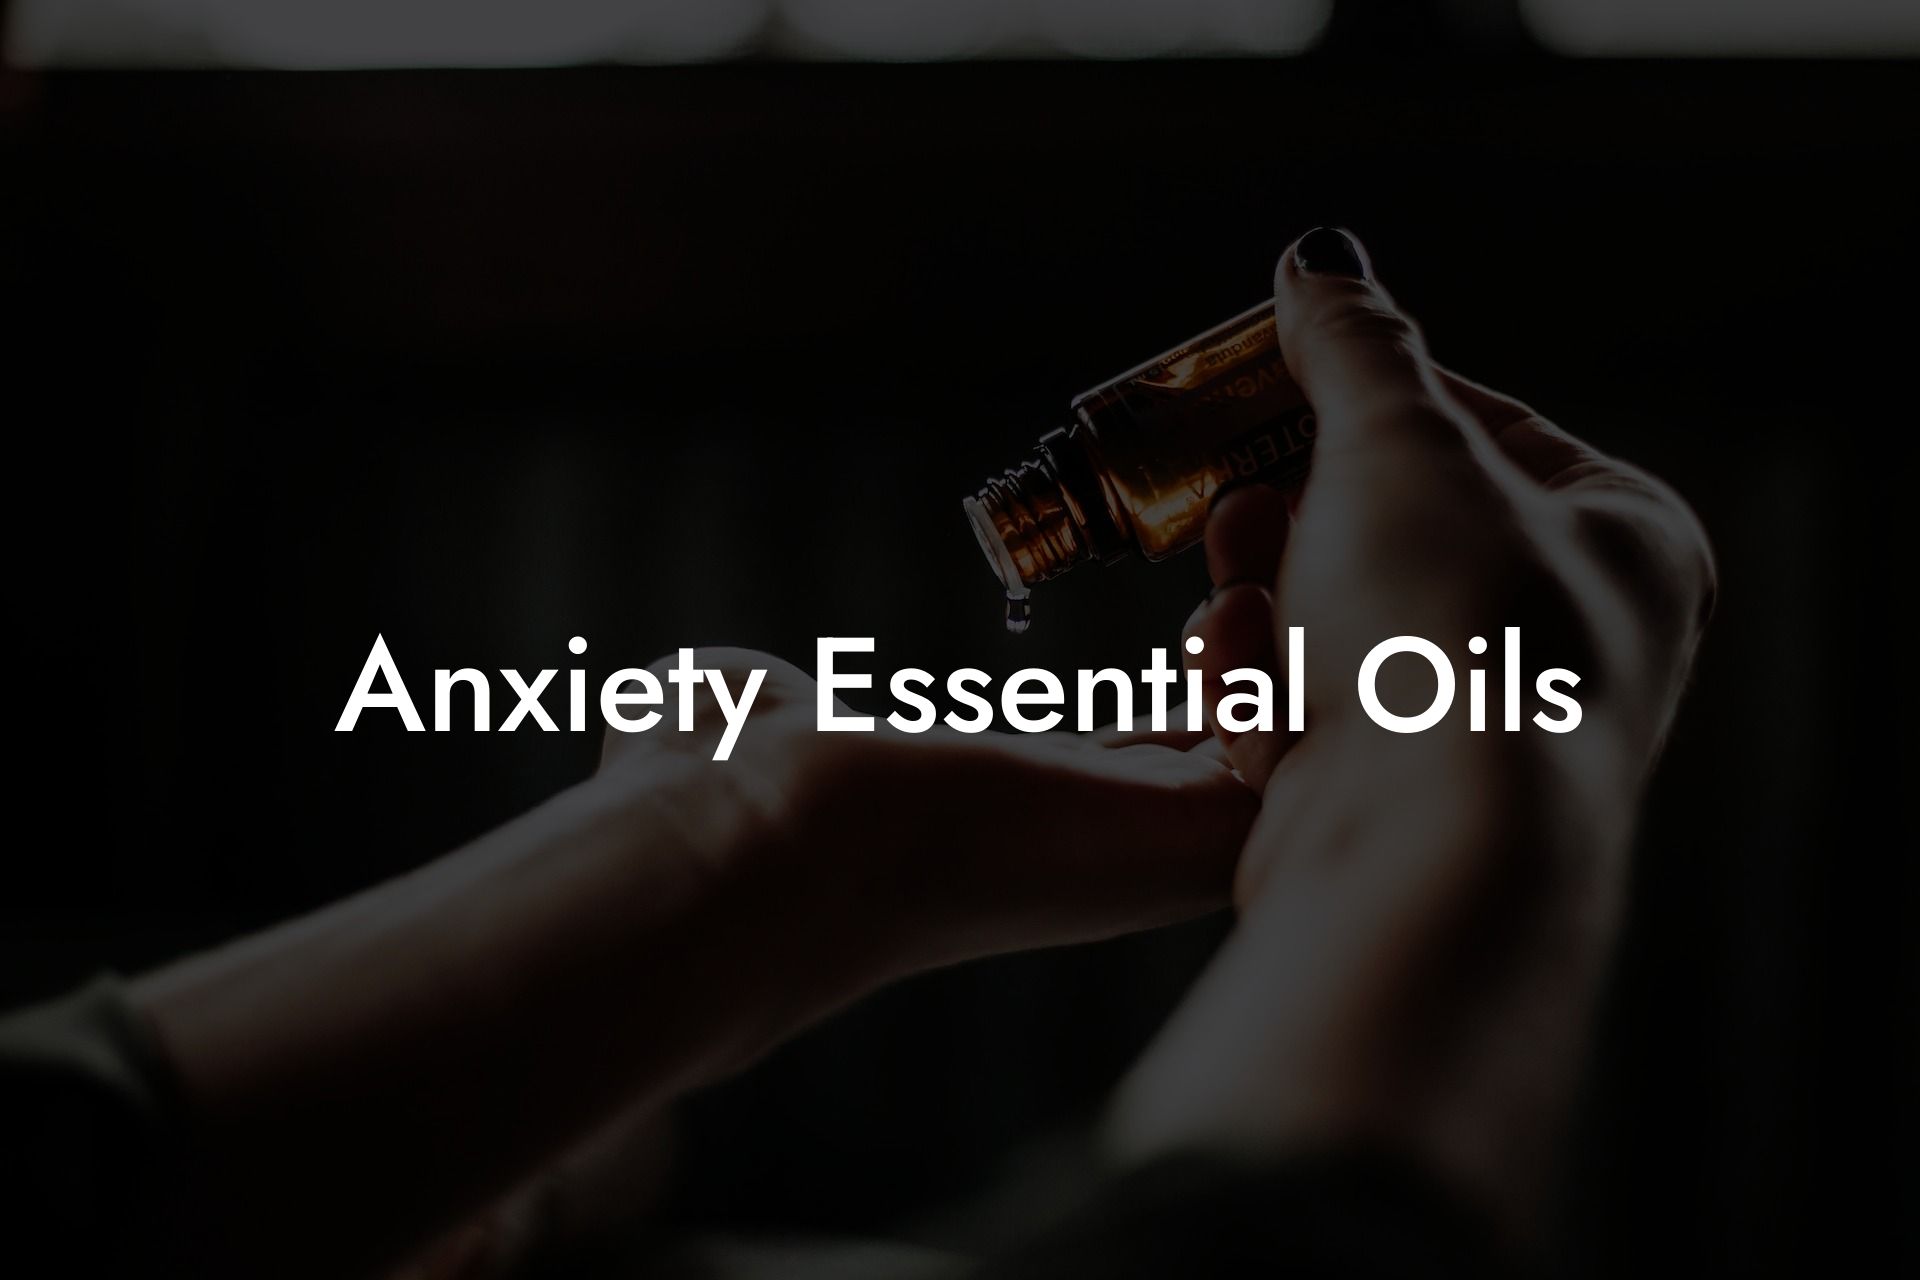 Anxiety Essential Oils